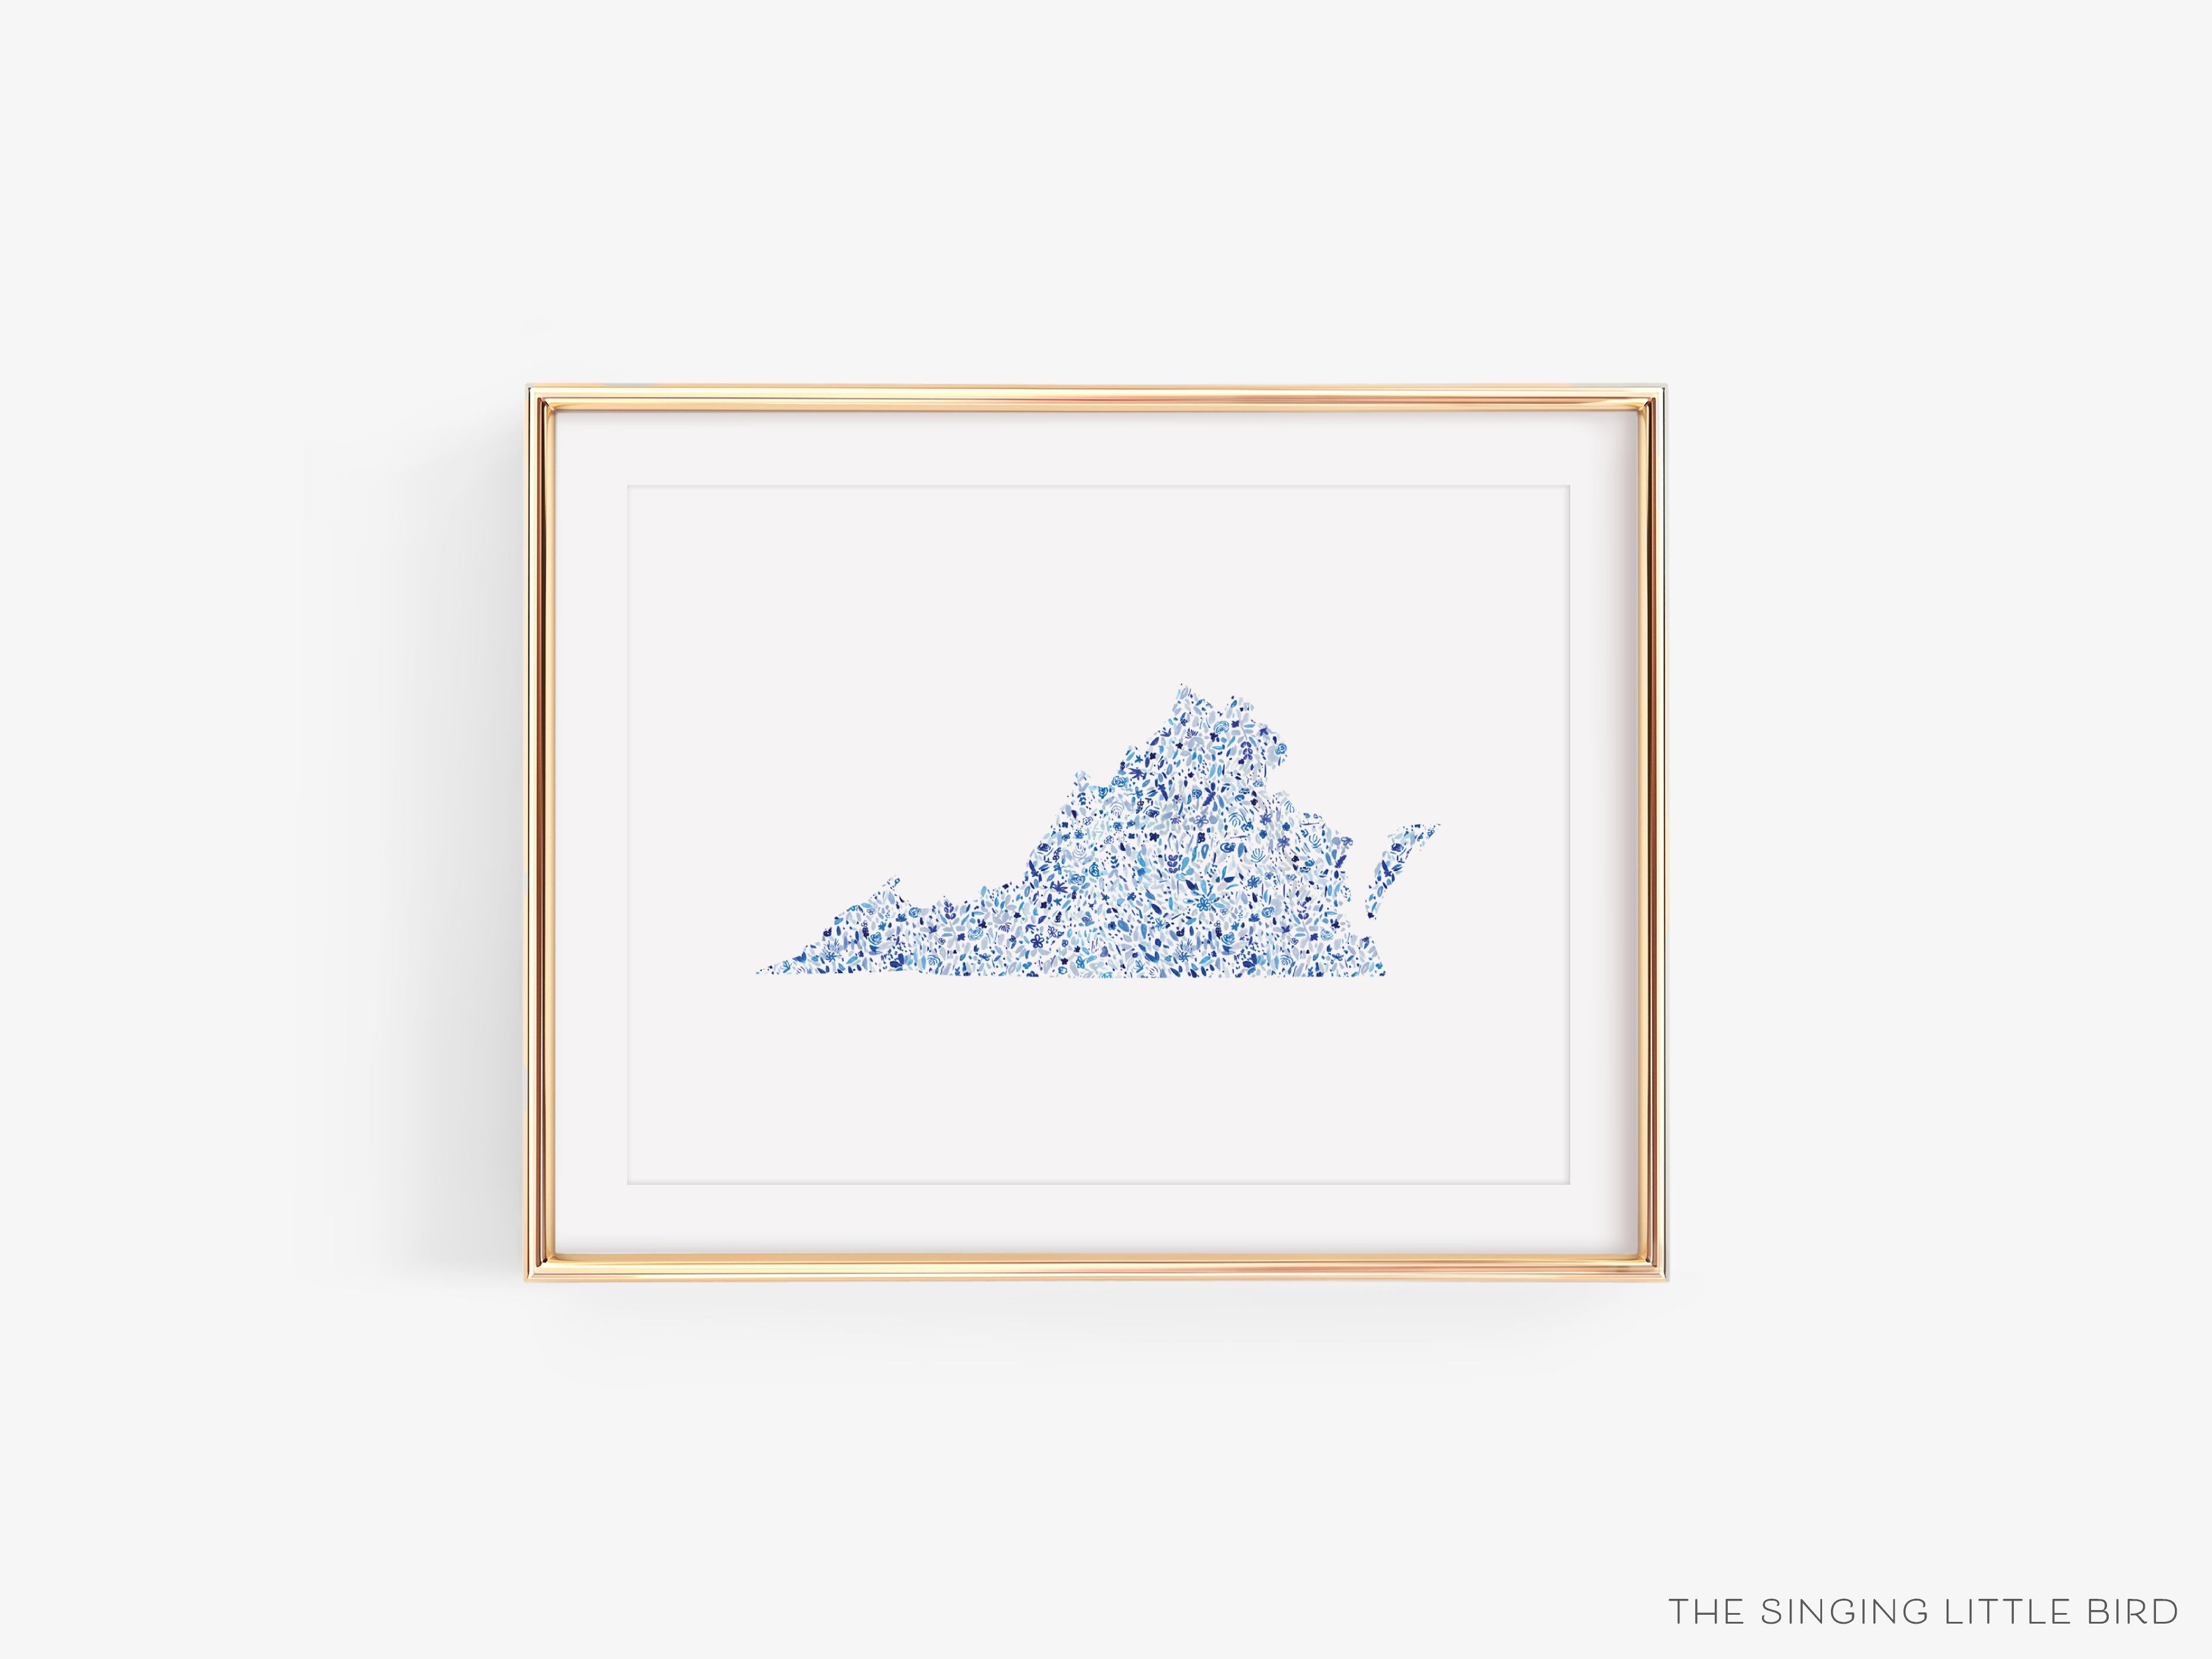 State of Virginia Art Print-This watercolor art print features our hand-painted floral pattern in the shape of Virginia, printed in the USA on 120lb high quality art paper. This makes a great gift or wall decor for the Virginian lover in your life.-The Singing Little Bird